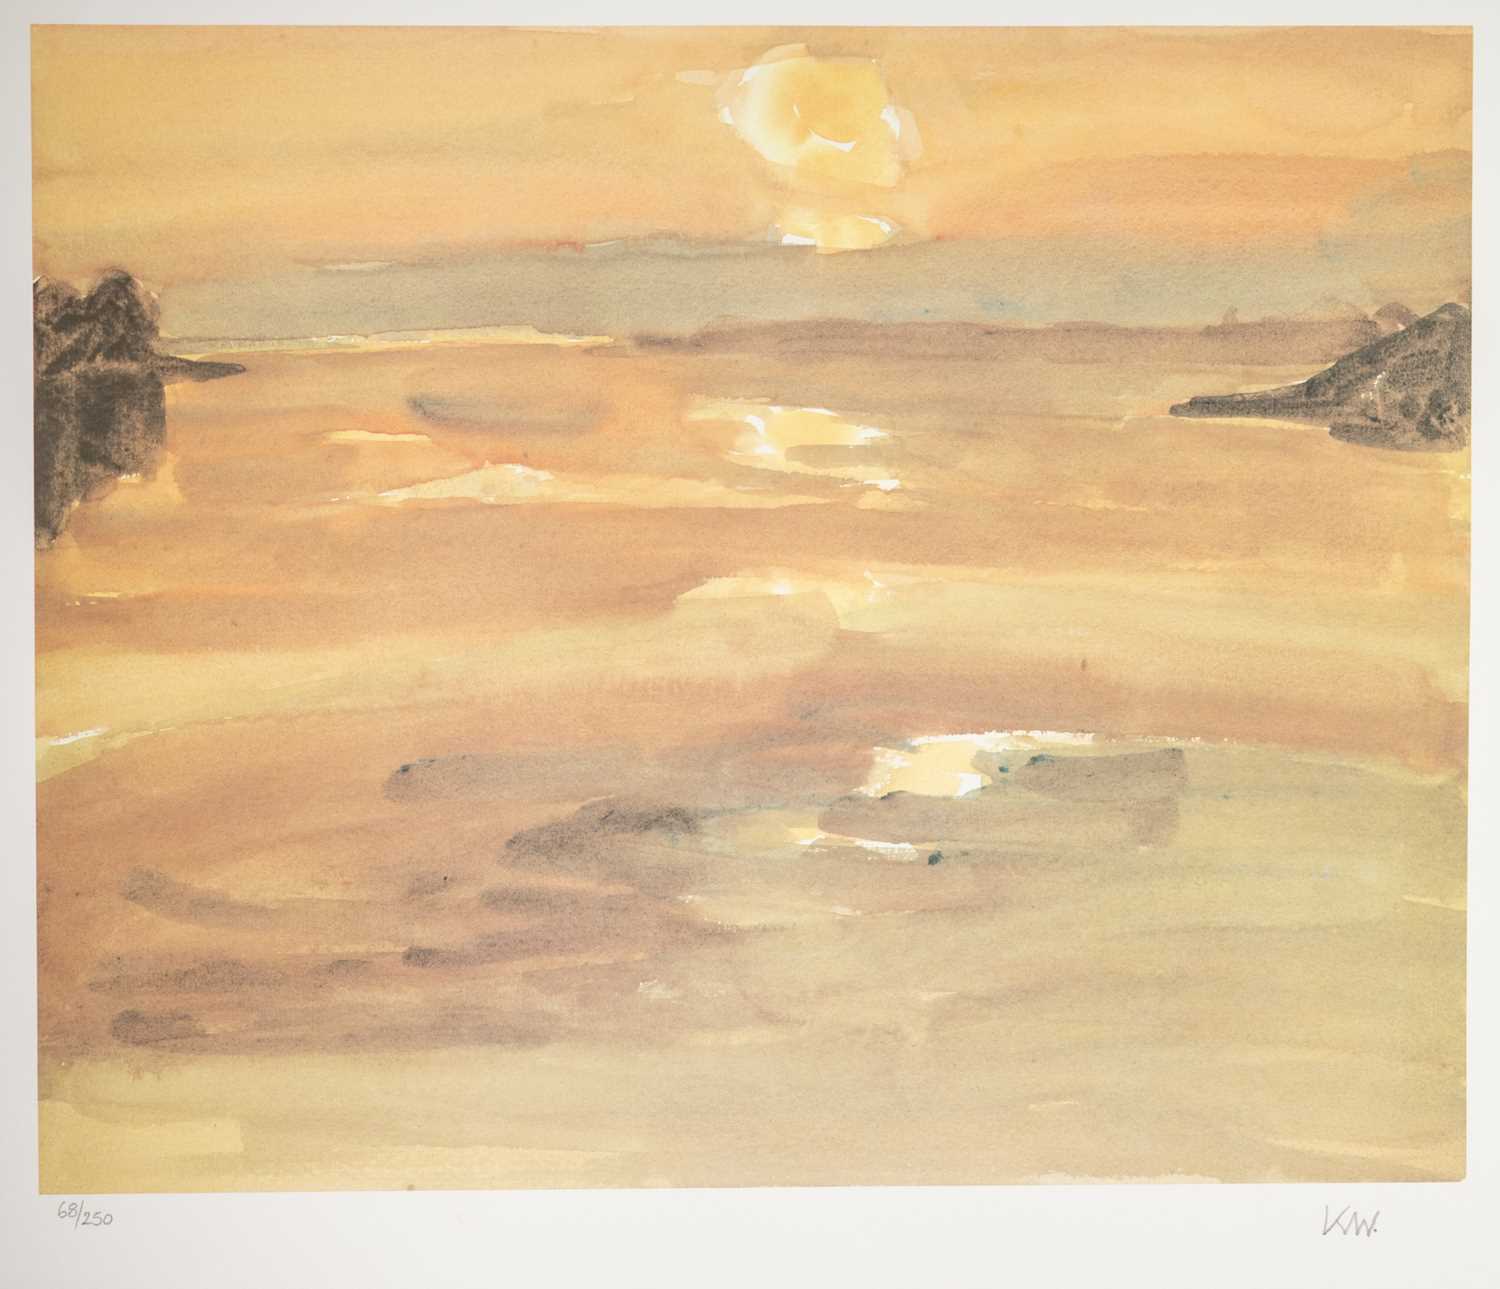 ‡ SIR KYFFIN WILLIAMS RA limited edition (68/250) print - sunset at Moel y Don on the Menai,